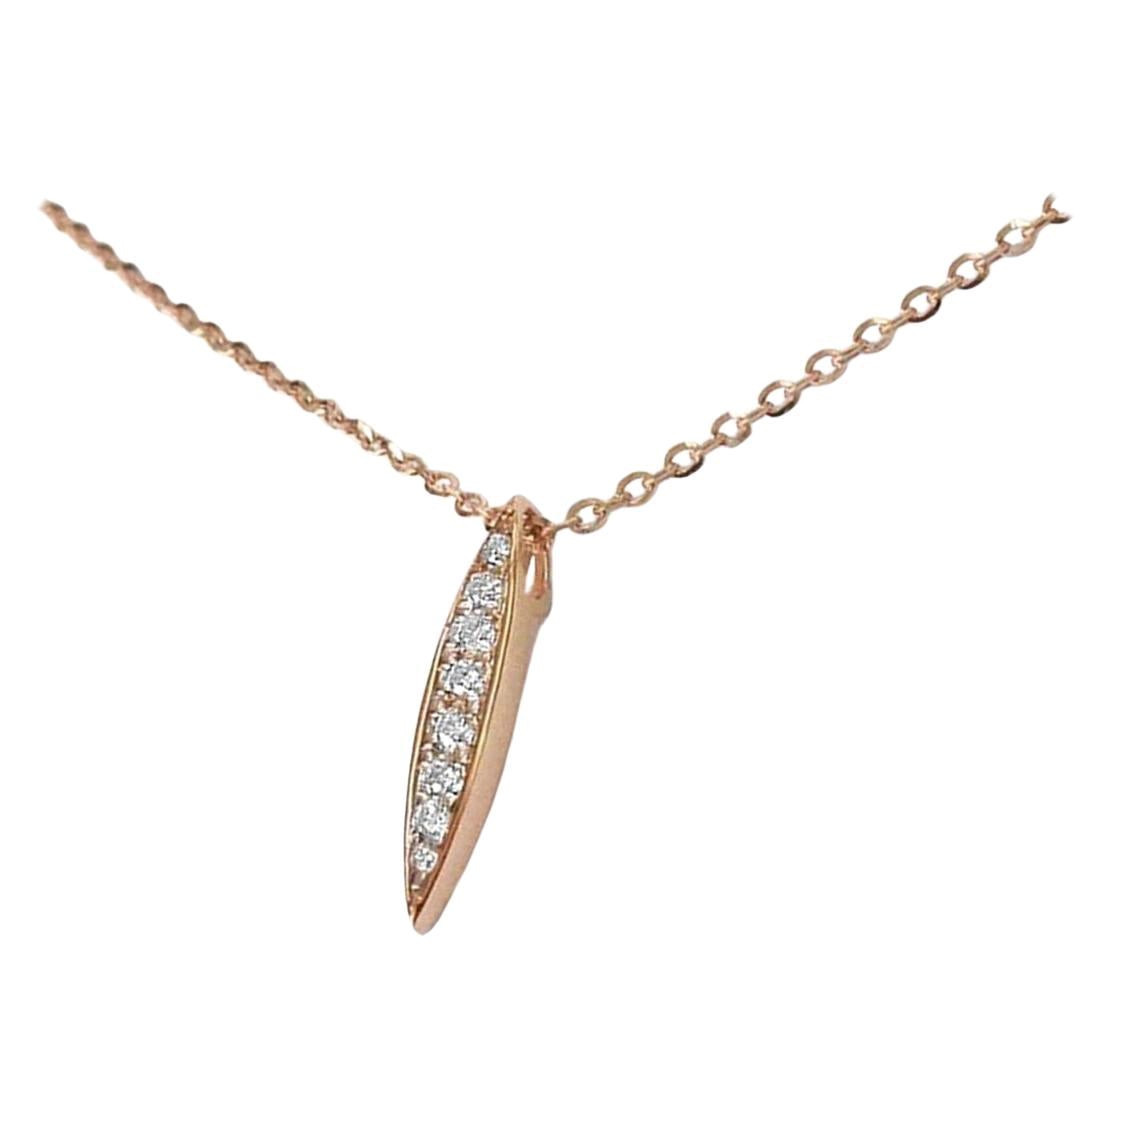 Pave Diamond Necklace is made of 18k solid gold available in three colors of gold, Rose Gold / White Gold / Yellow Gold.

Natural genuine round cut diamond each diamond is hand selected by me to ensure quality and set by a master setter in our